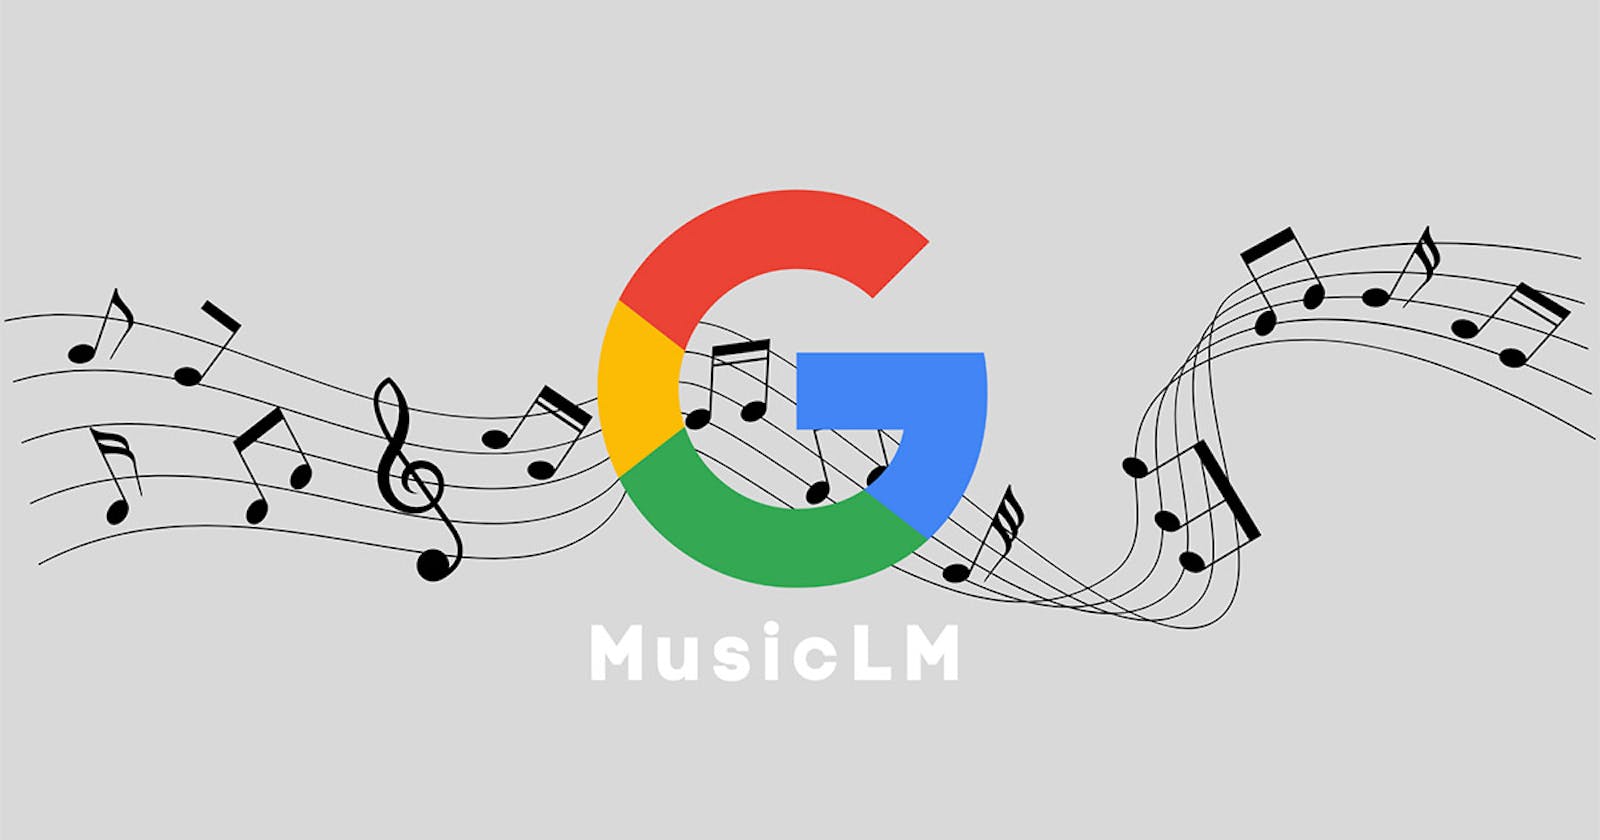 MusicLM: The Future of Music? My First Impressions of Google's Exciting AI Music Tool